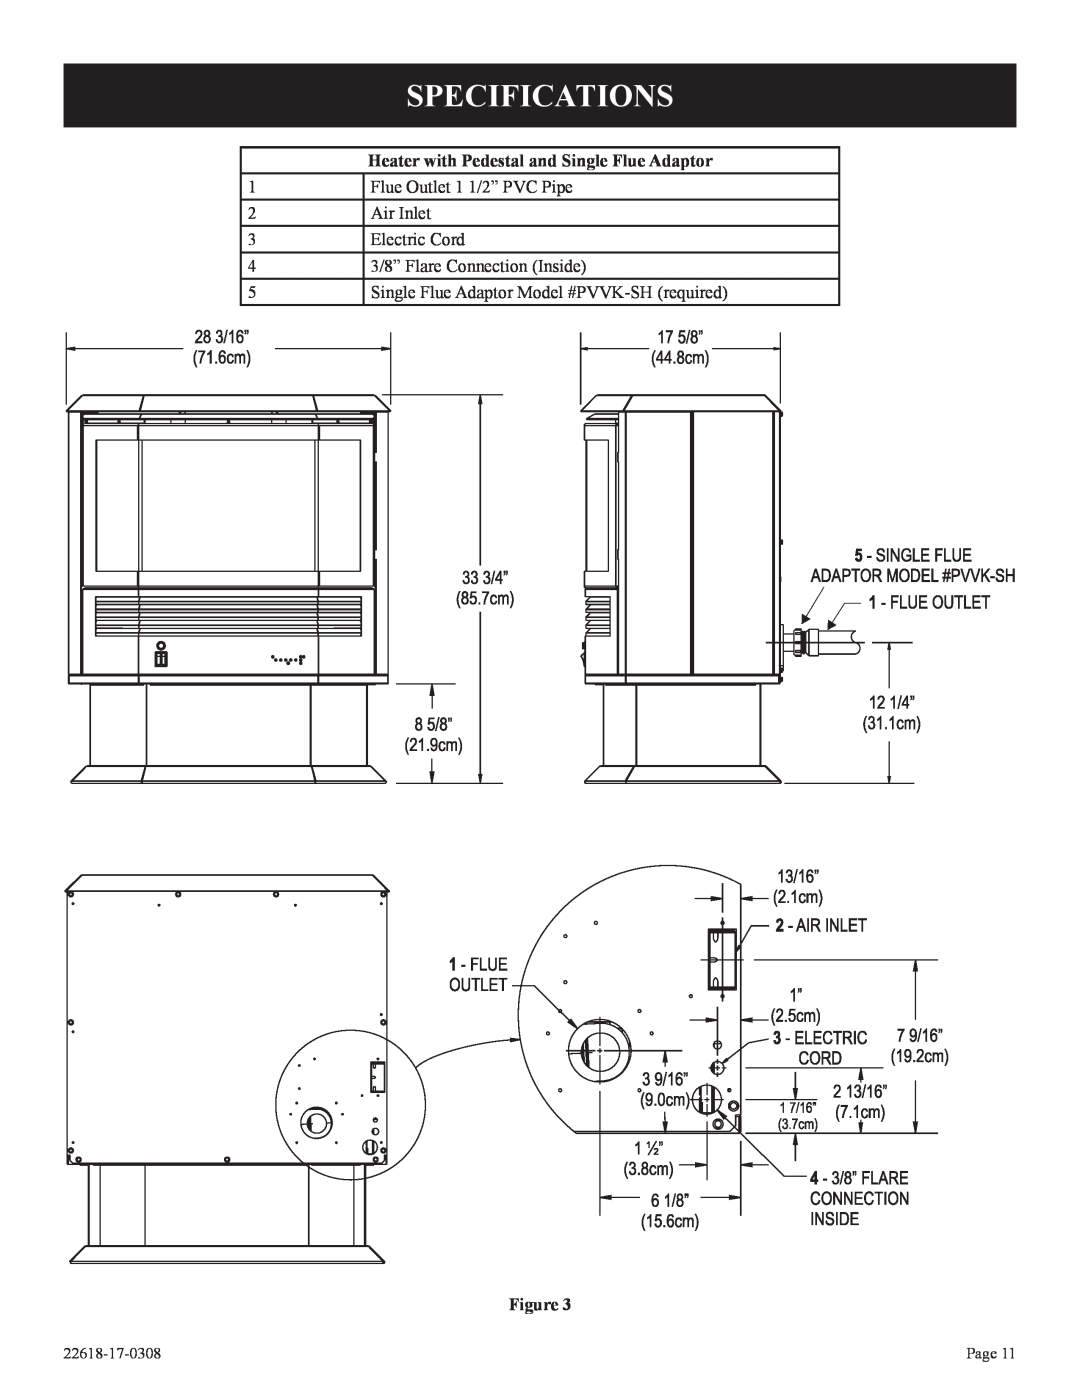 Empire Comfort Systems CP, PV-28SV50-BN Specifications, Heater with Pedestal and Single Flue Adaptor, 22618-17-0308, Page 